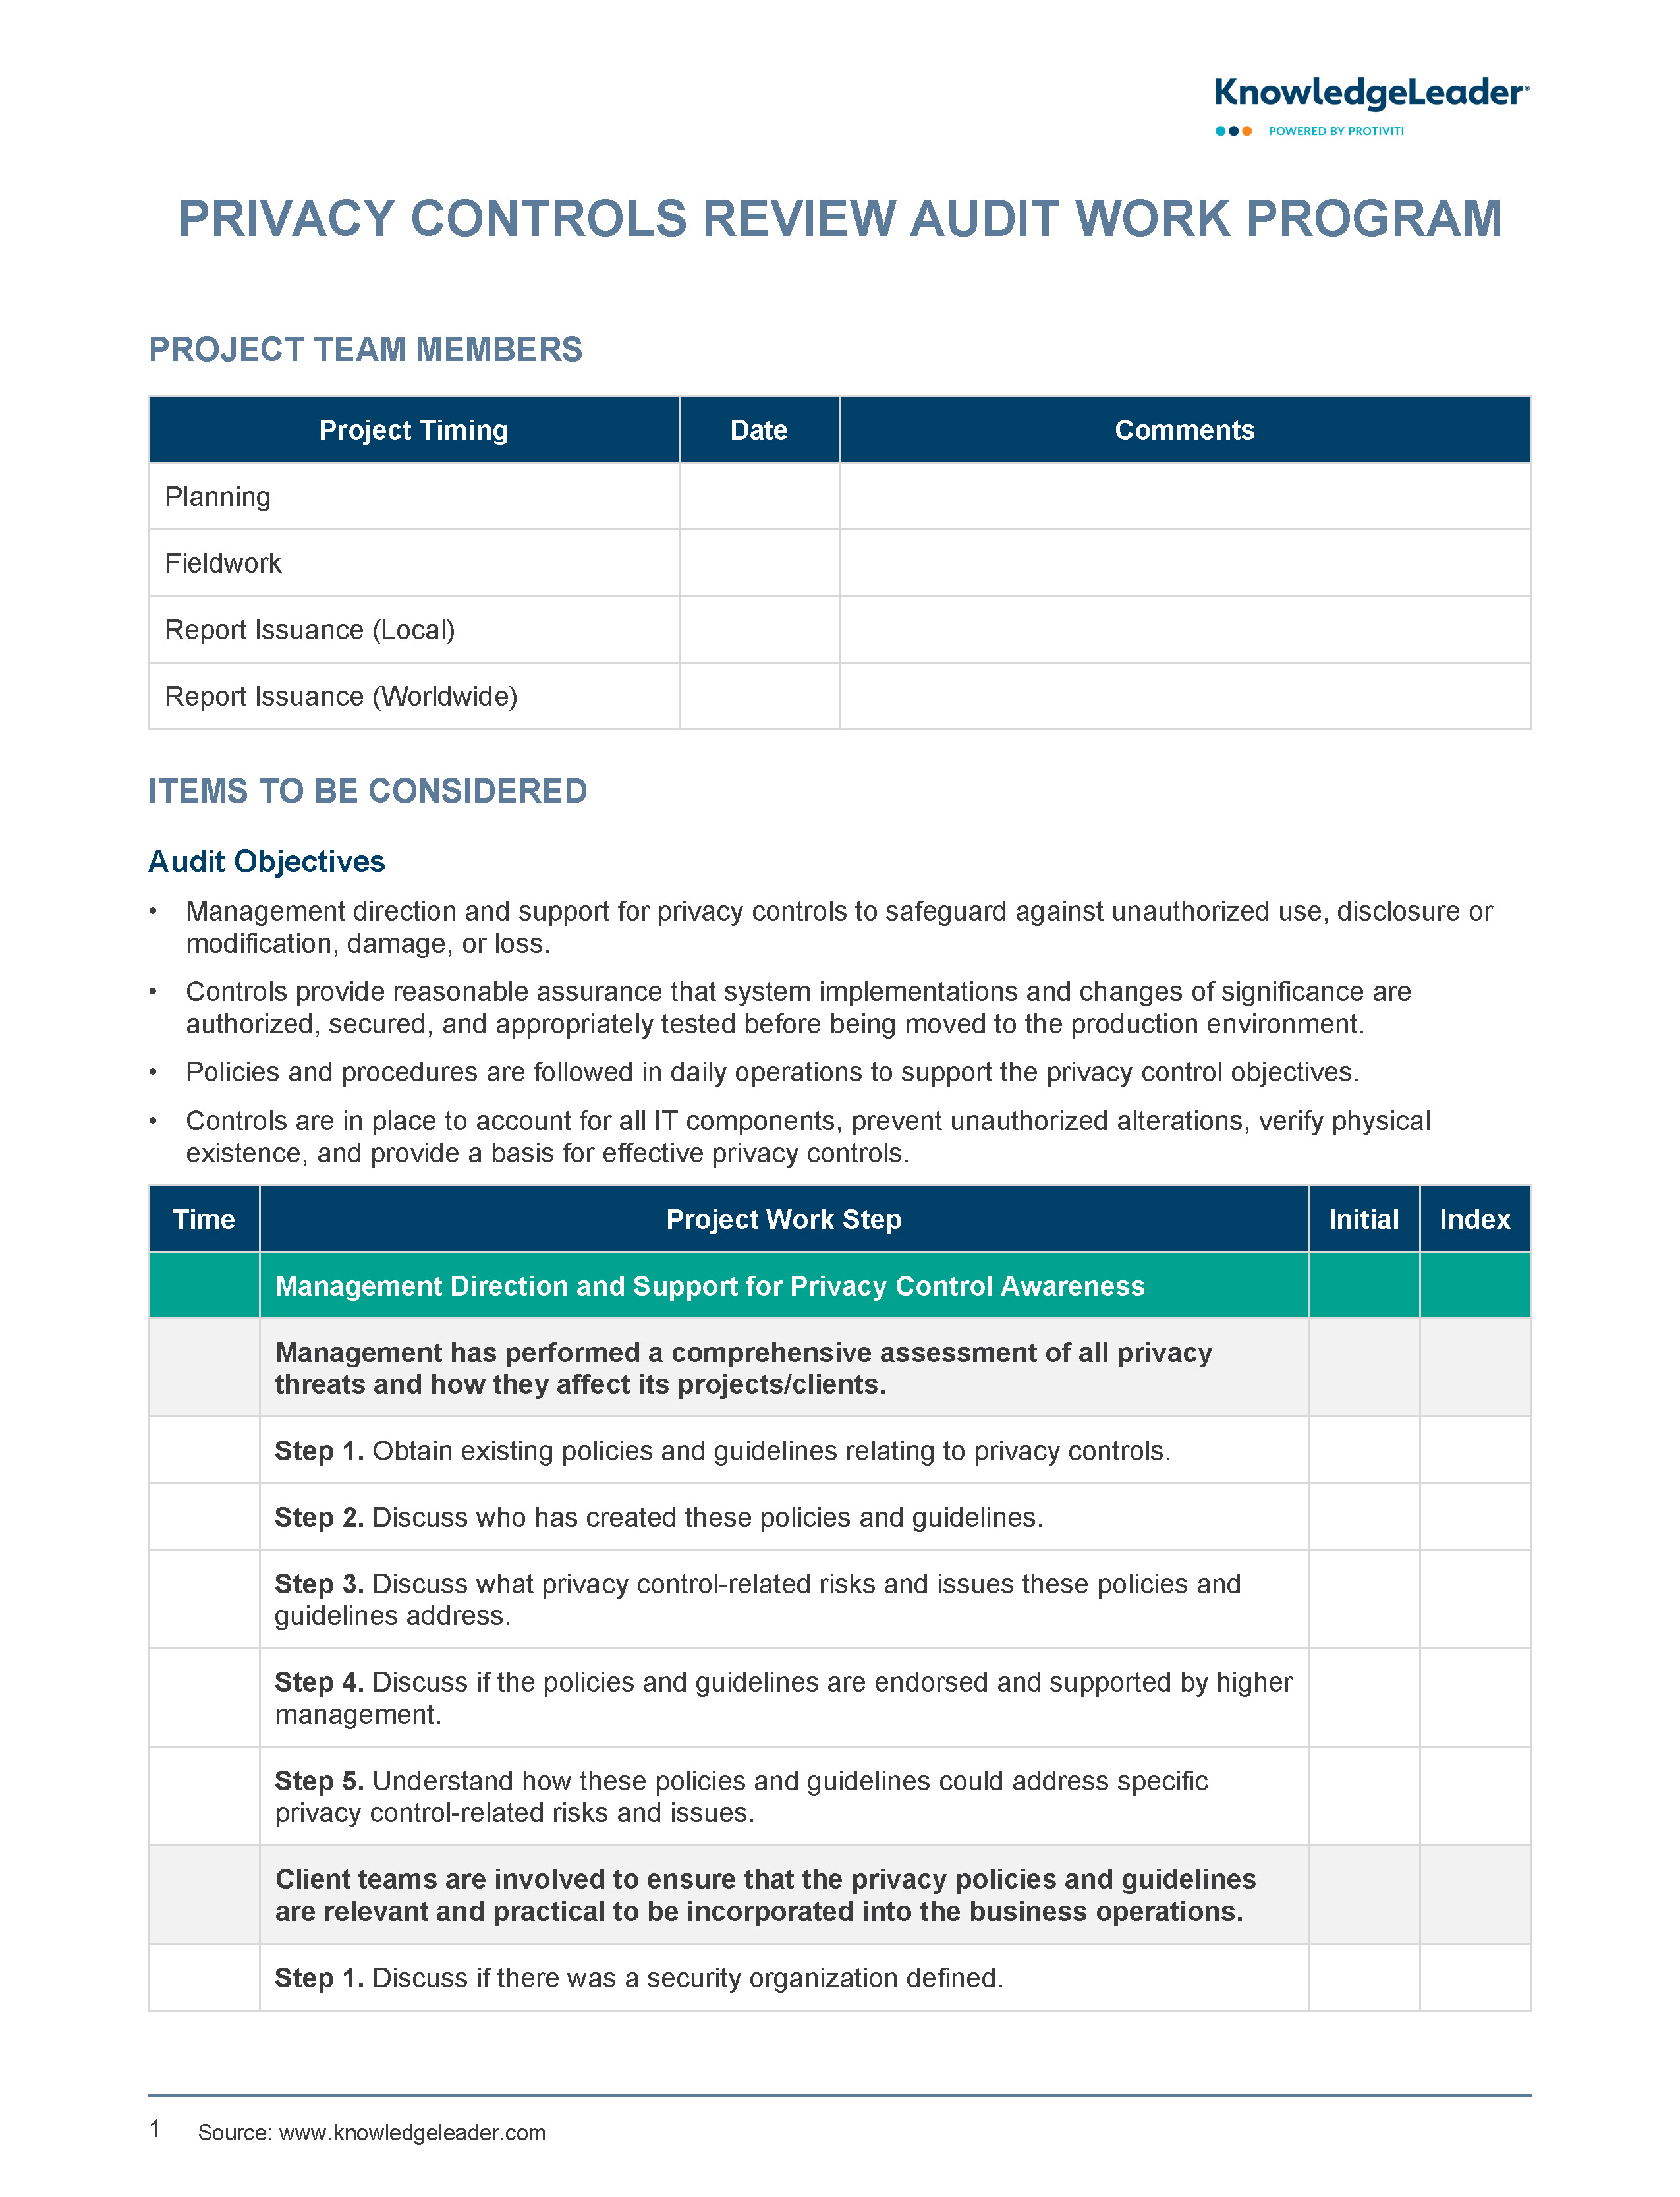 Screenshot of the first page of Privacy Control Review Audit Work Program